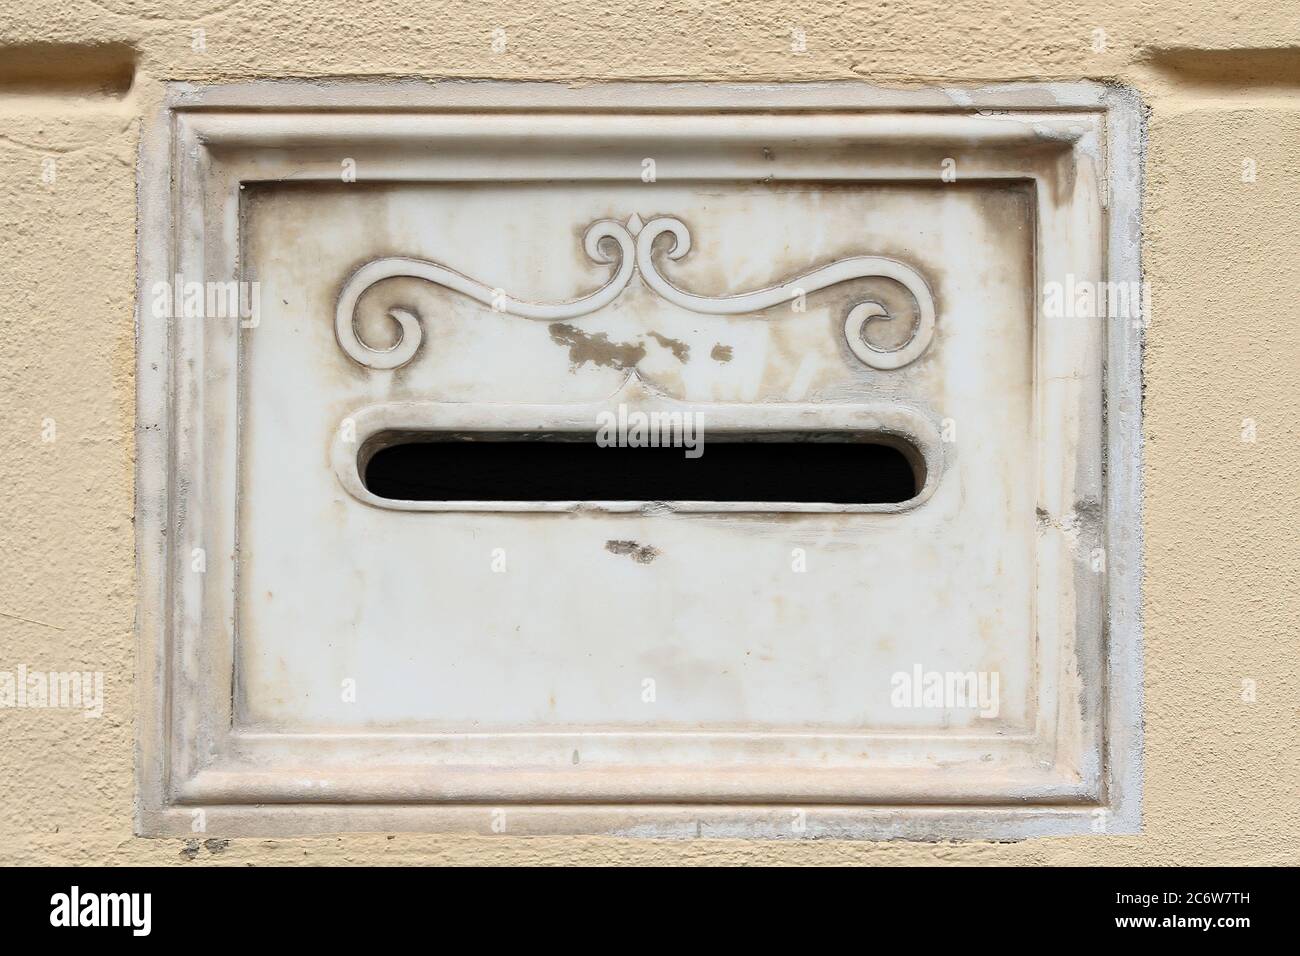 Decorative element. Vintage marble built-in mailbox decorated with embossed ornate scroll . Pisa. Italy. Stock Photo